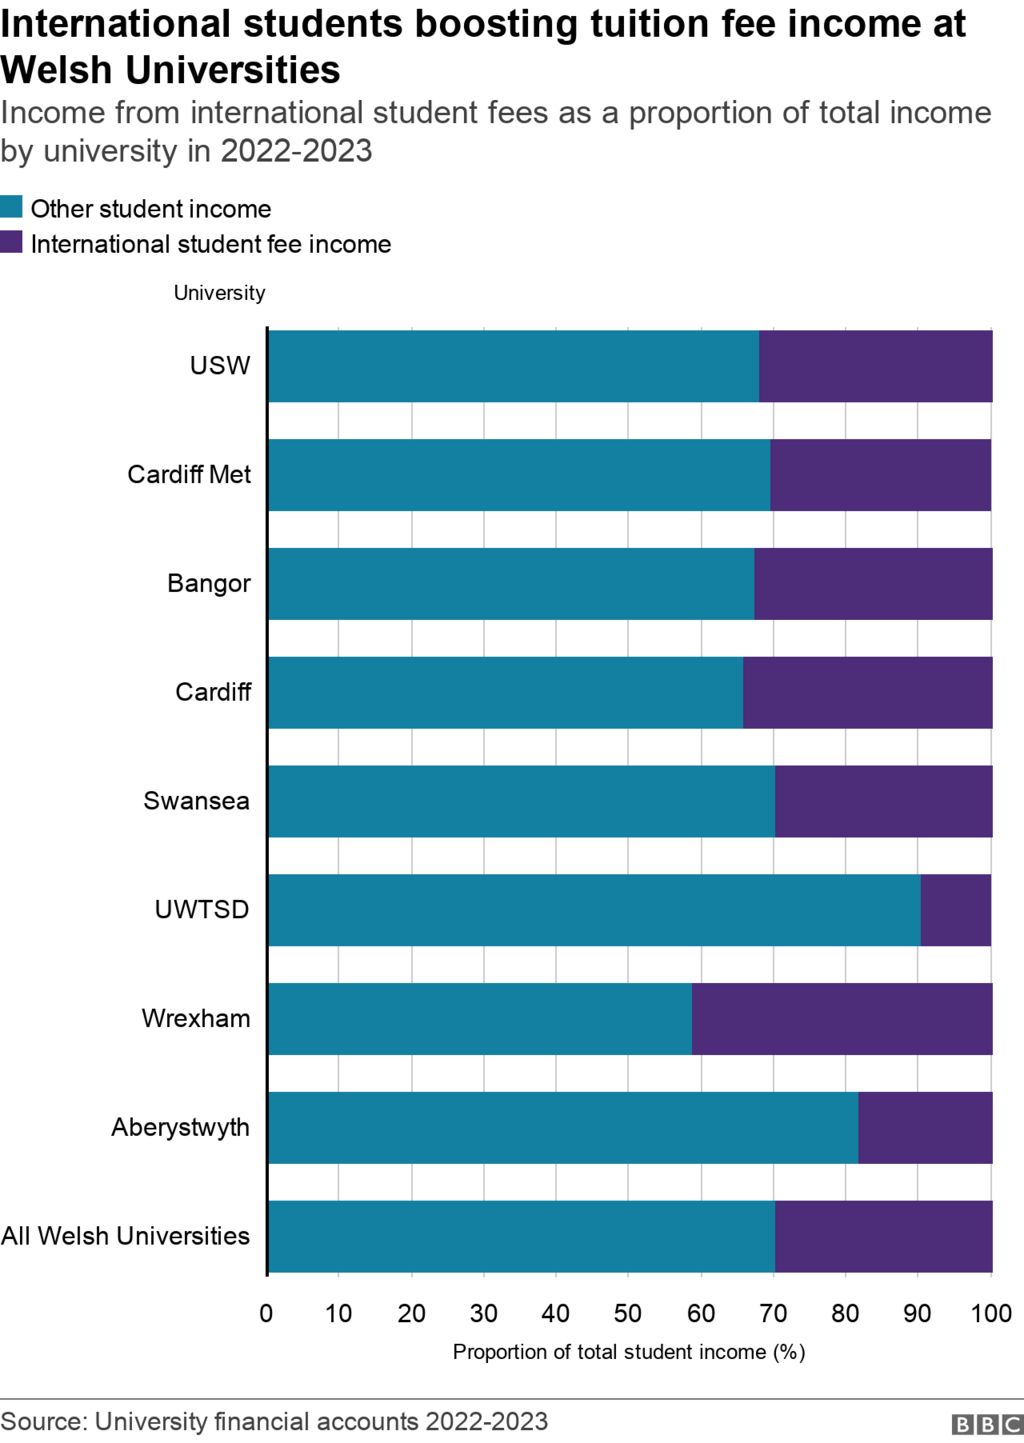 Graphic showing income from international student fees at Welsh universities